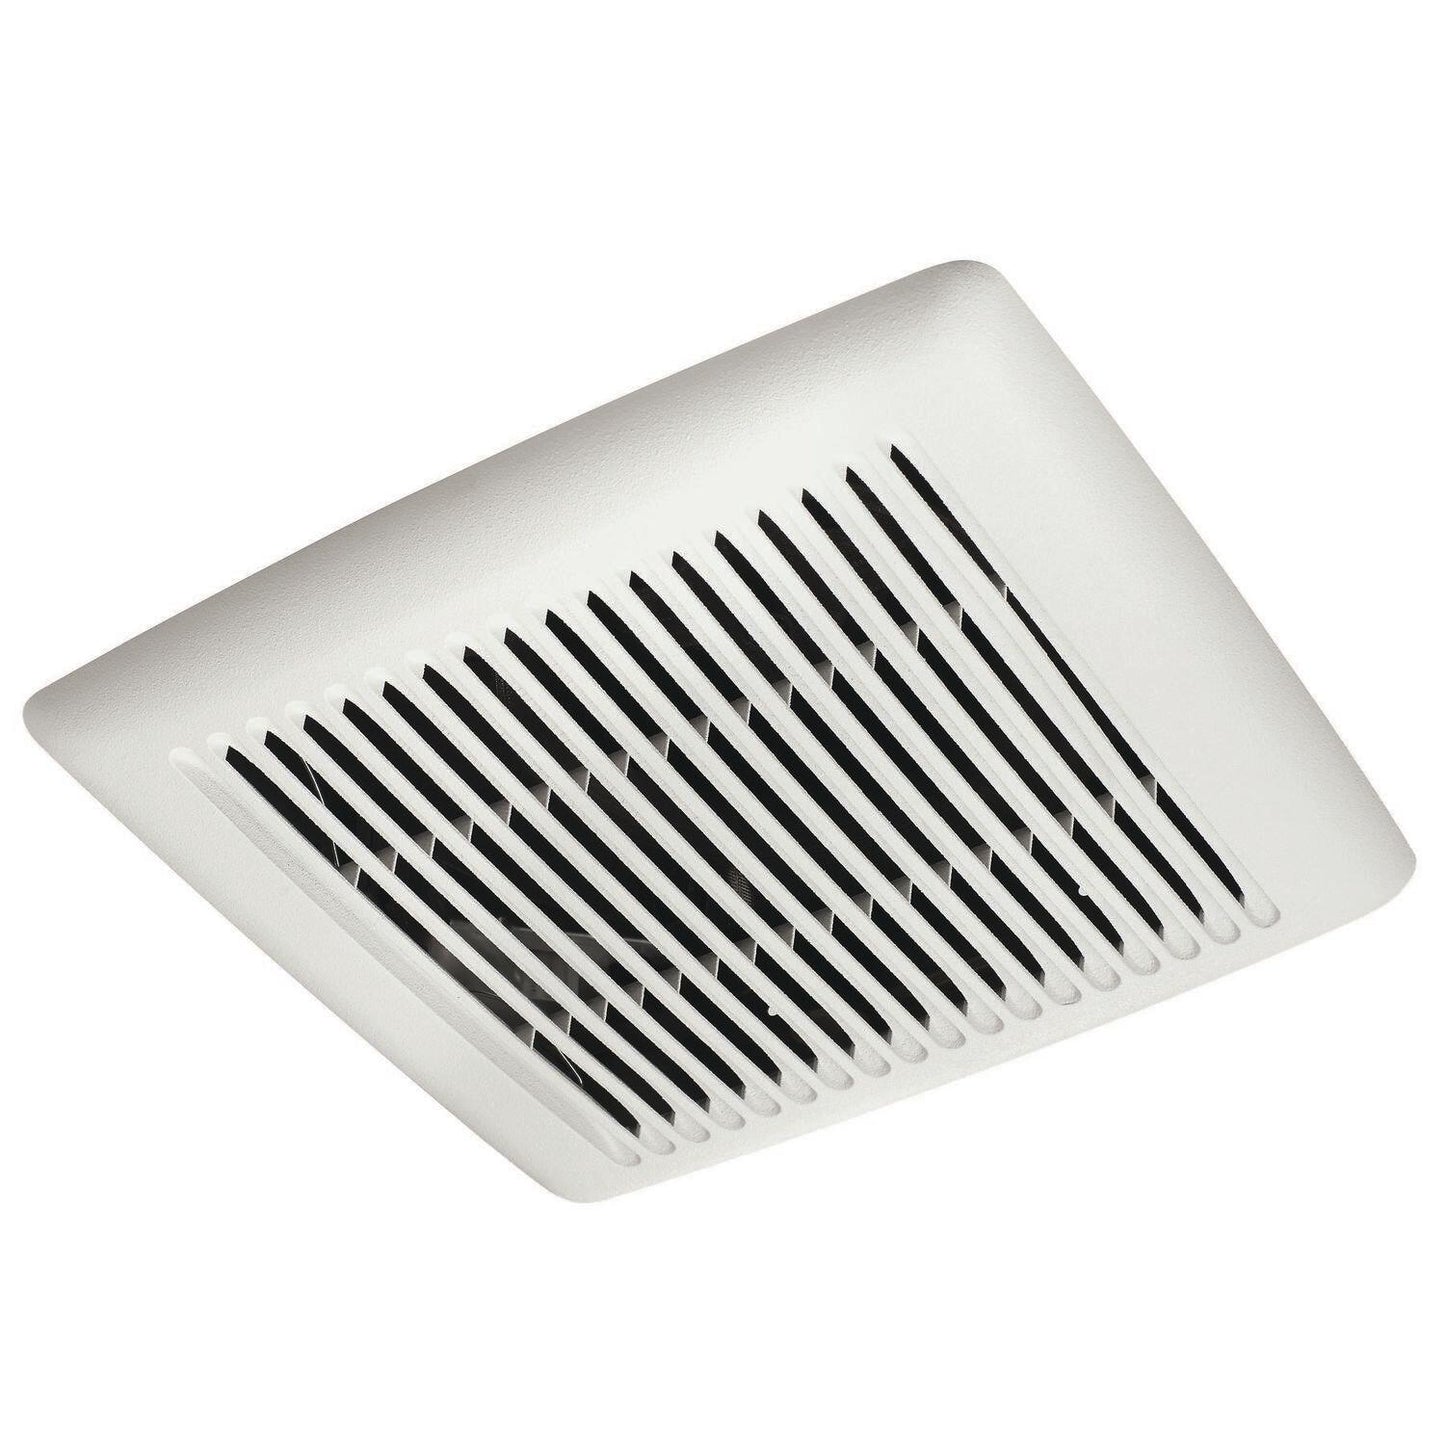 Broan AER50 Broan-Nutone® Wall Vent Kit, 3" Or 4" Round Duct